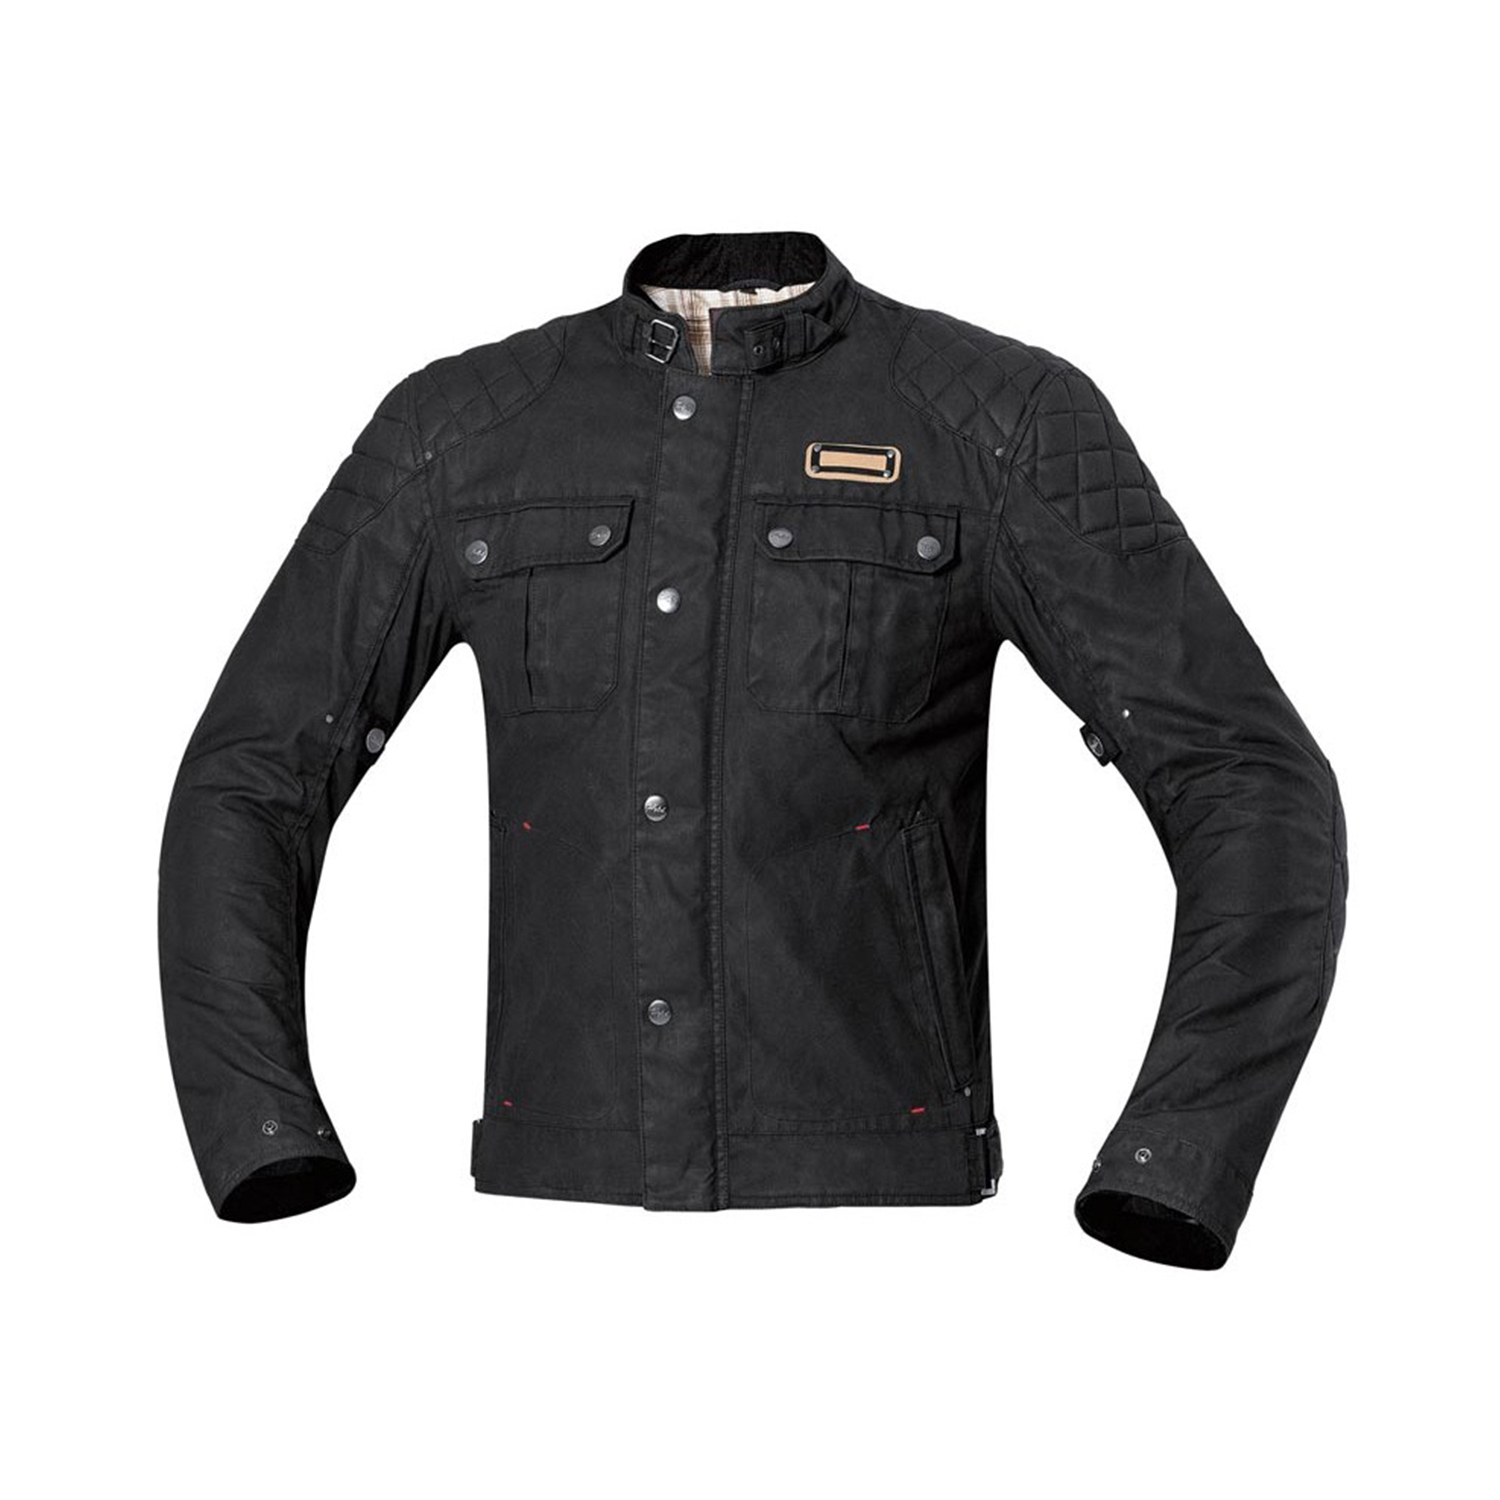 Held Sixty-Six Jacket Black - Available in Various Sizes